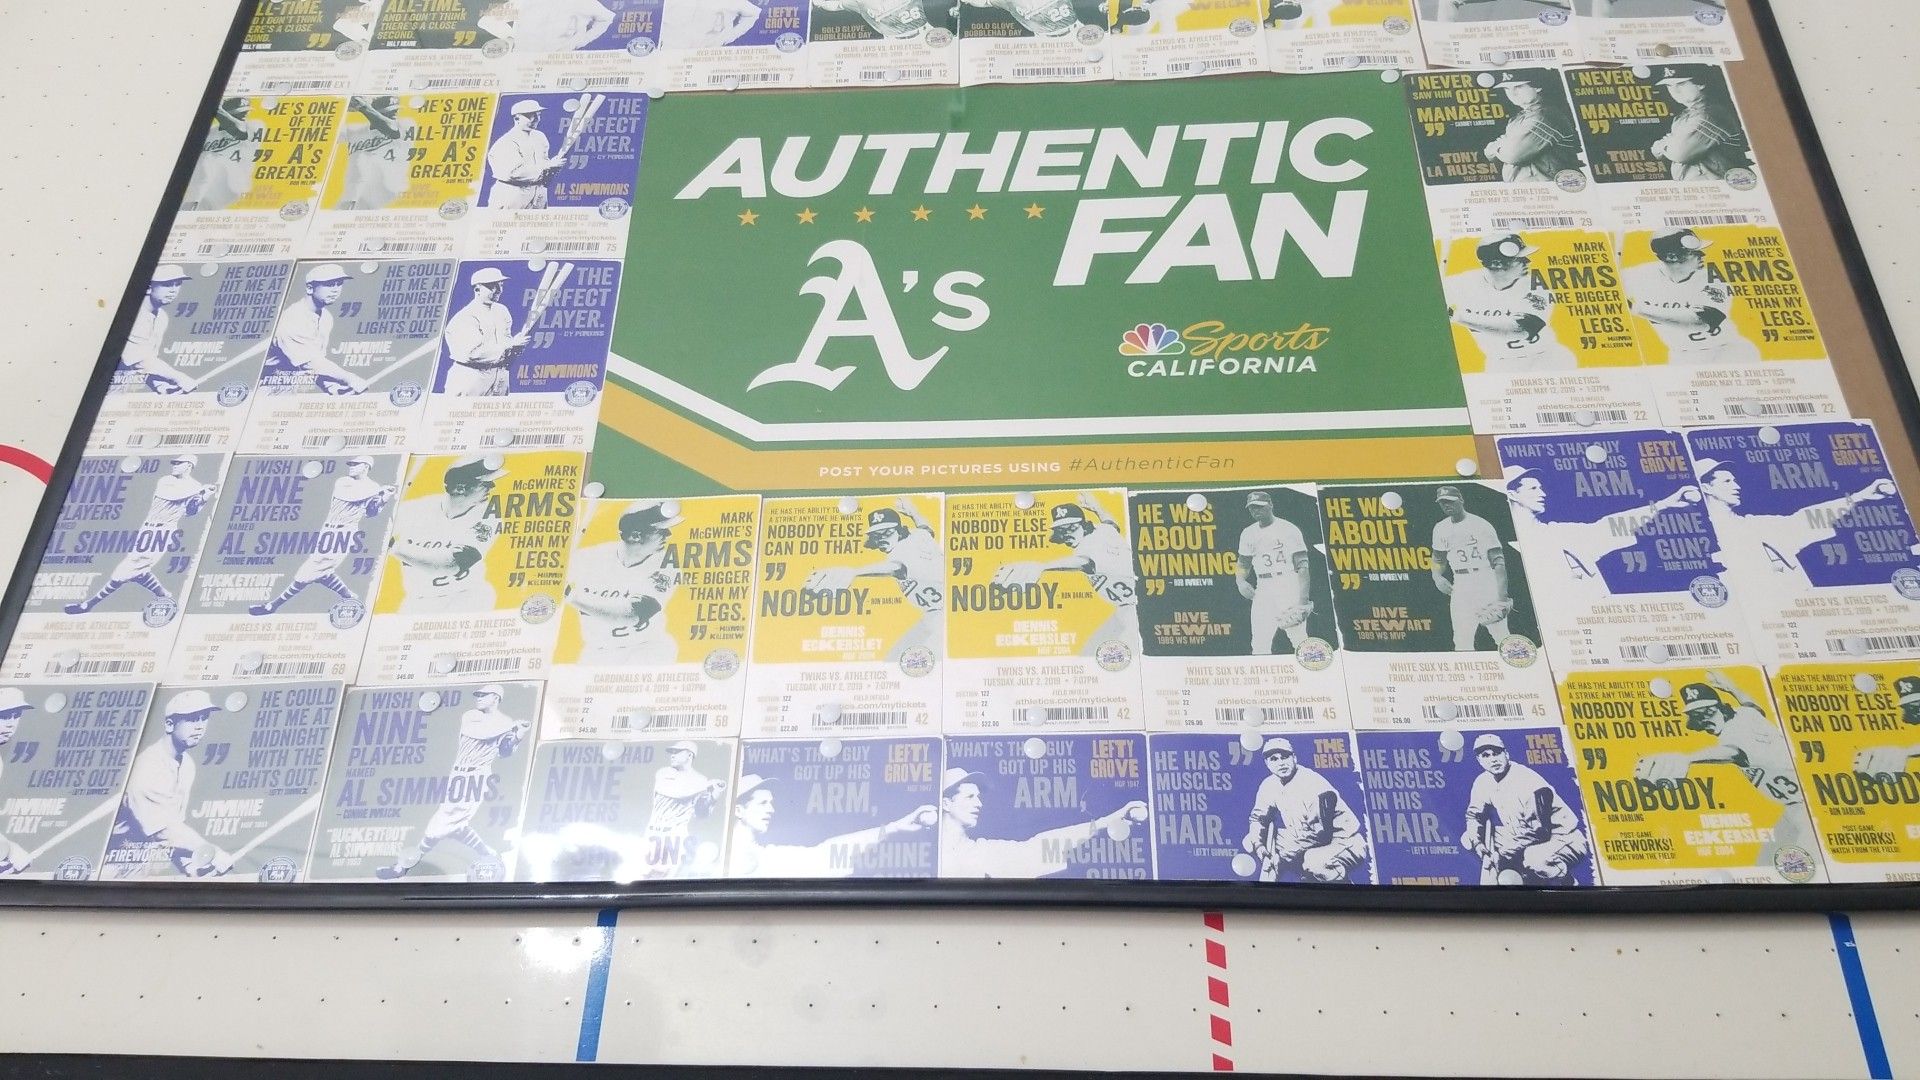 Tickets from last year's Oakland athletics game with frame